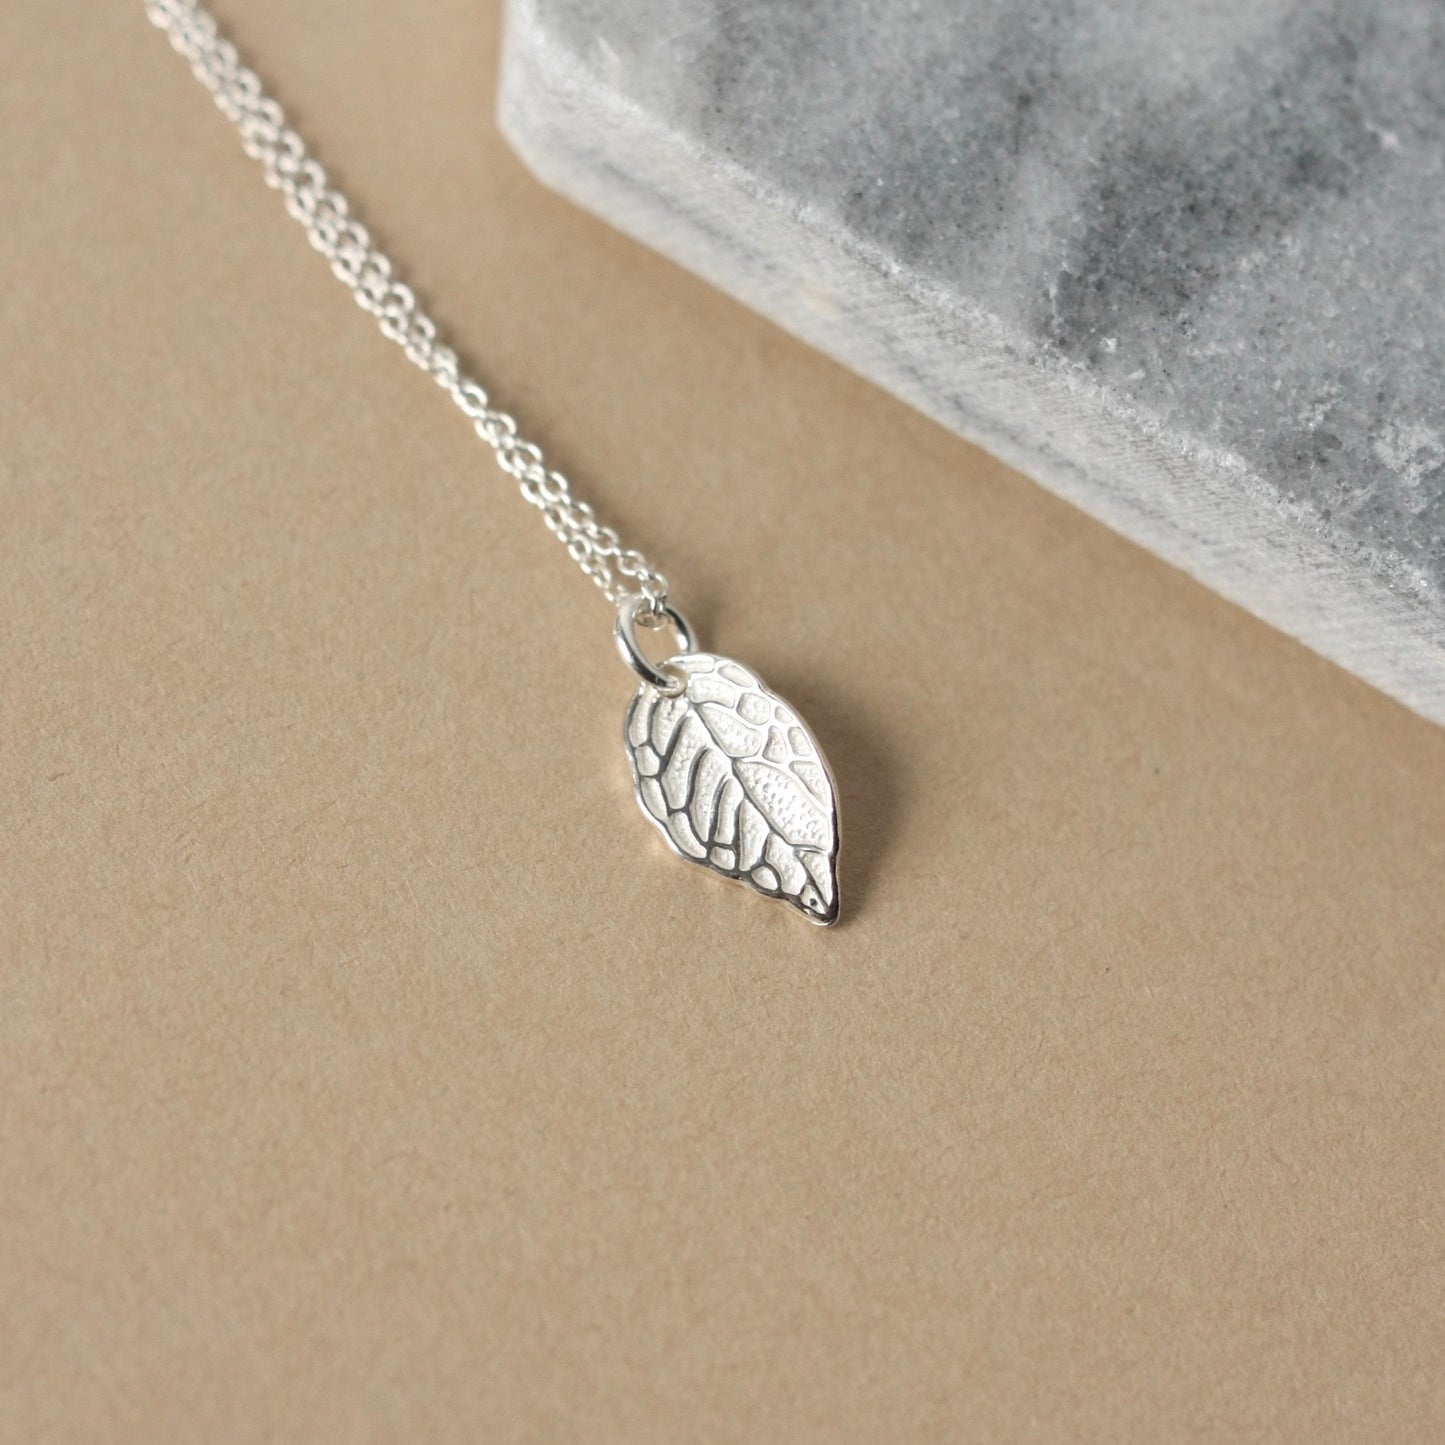 SALE Small Sterling Silver Leaf Necklace